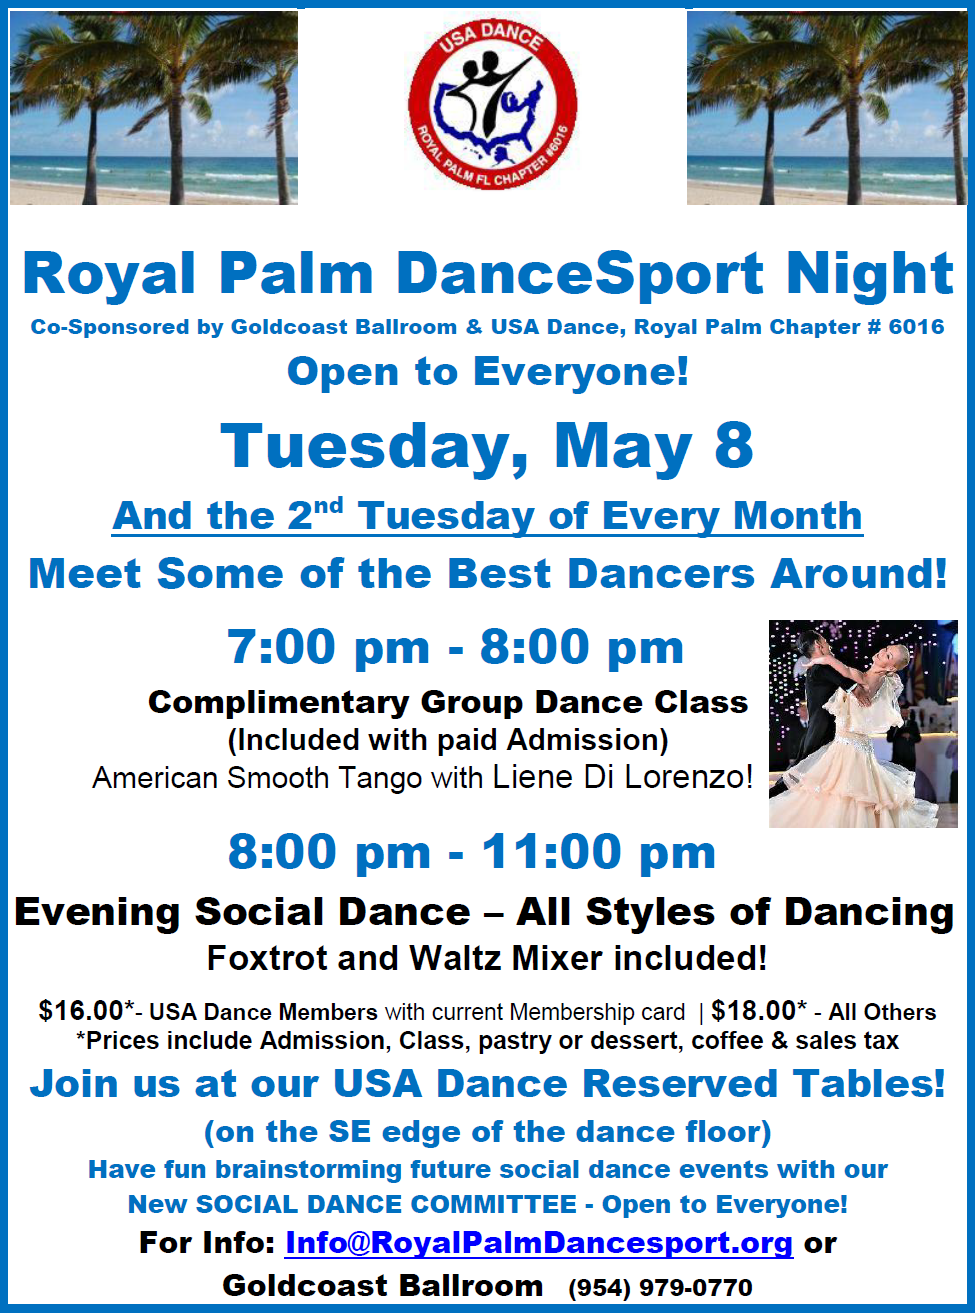 Royal Palm DanceSport Night - Tuesday, May 8 & the 2nd Tuesday of Every Month